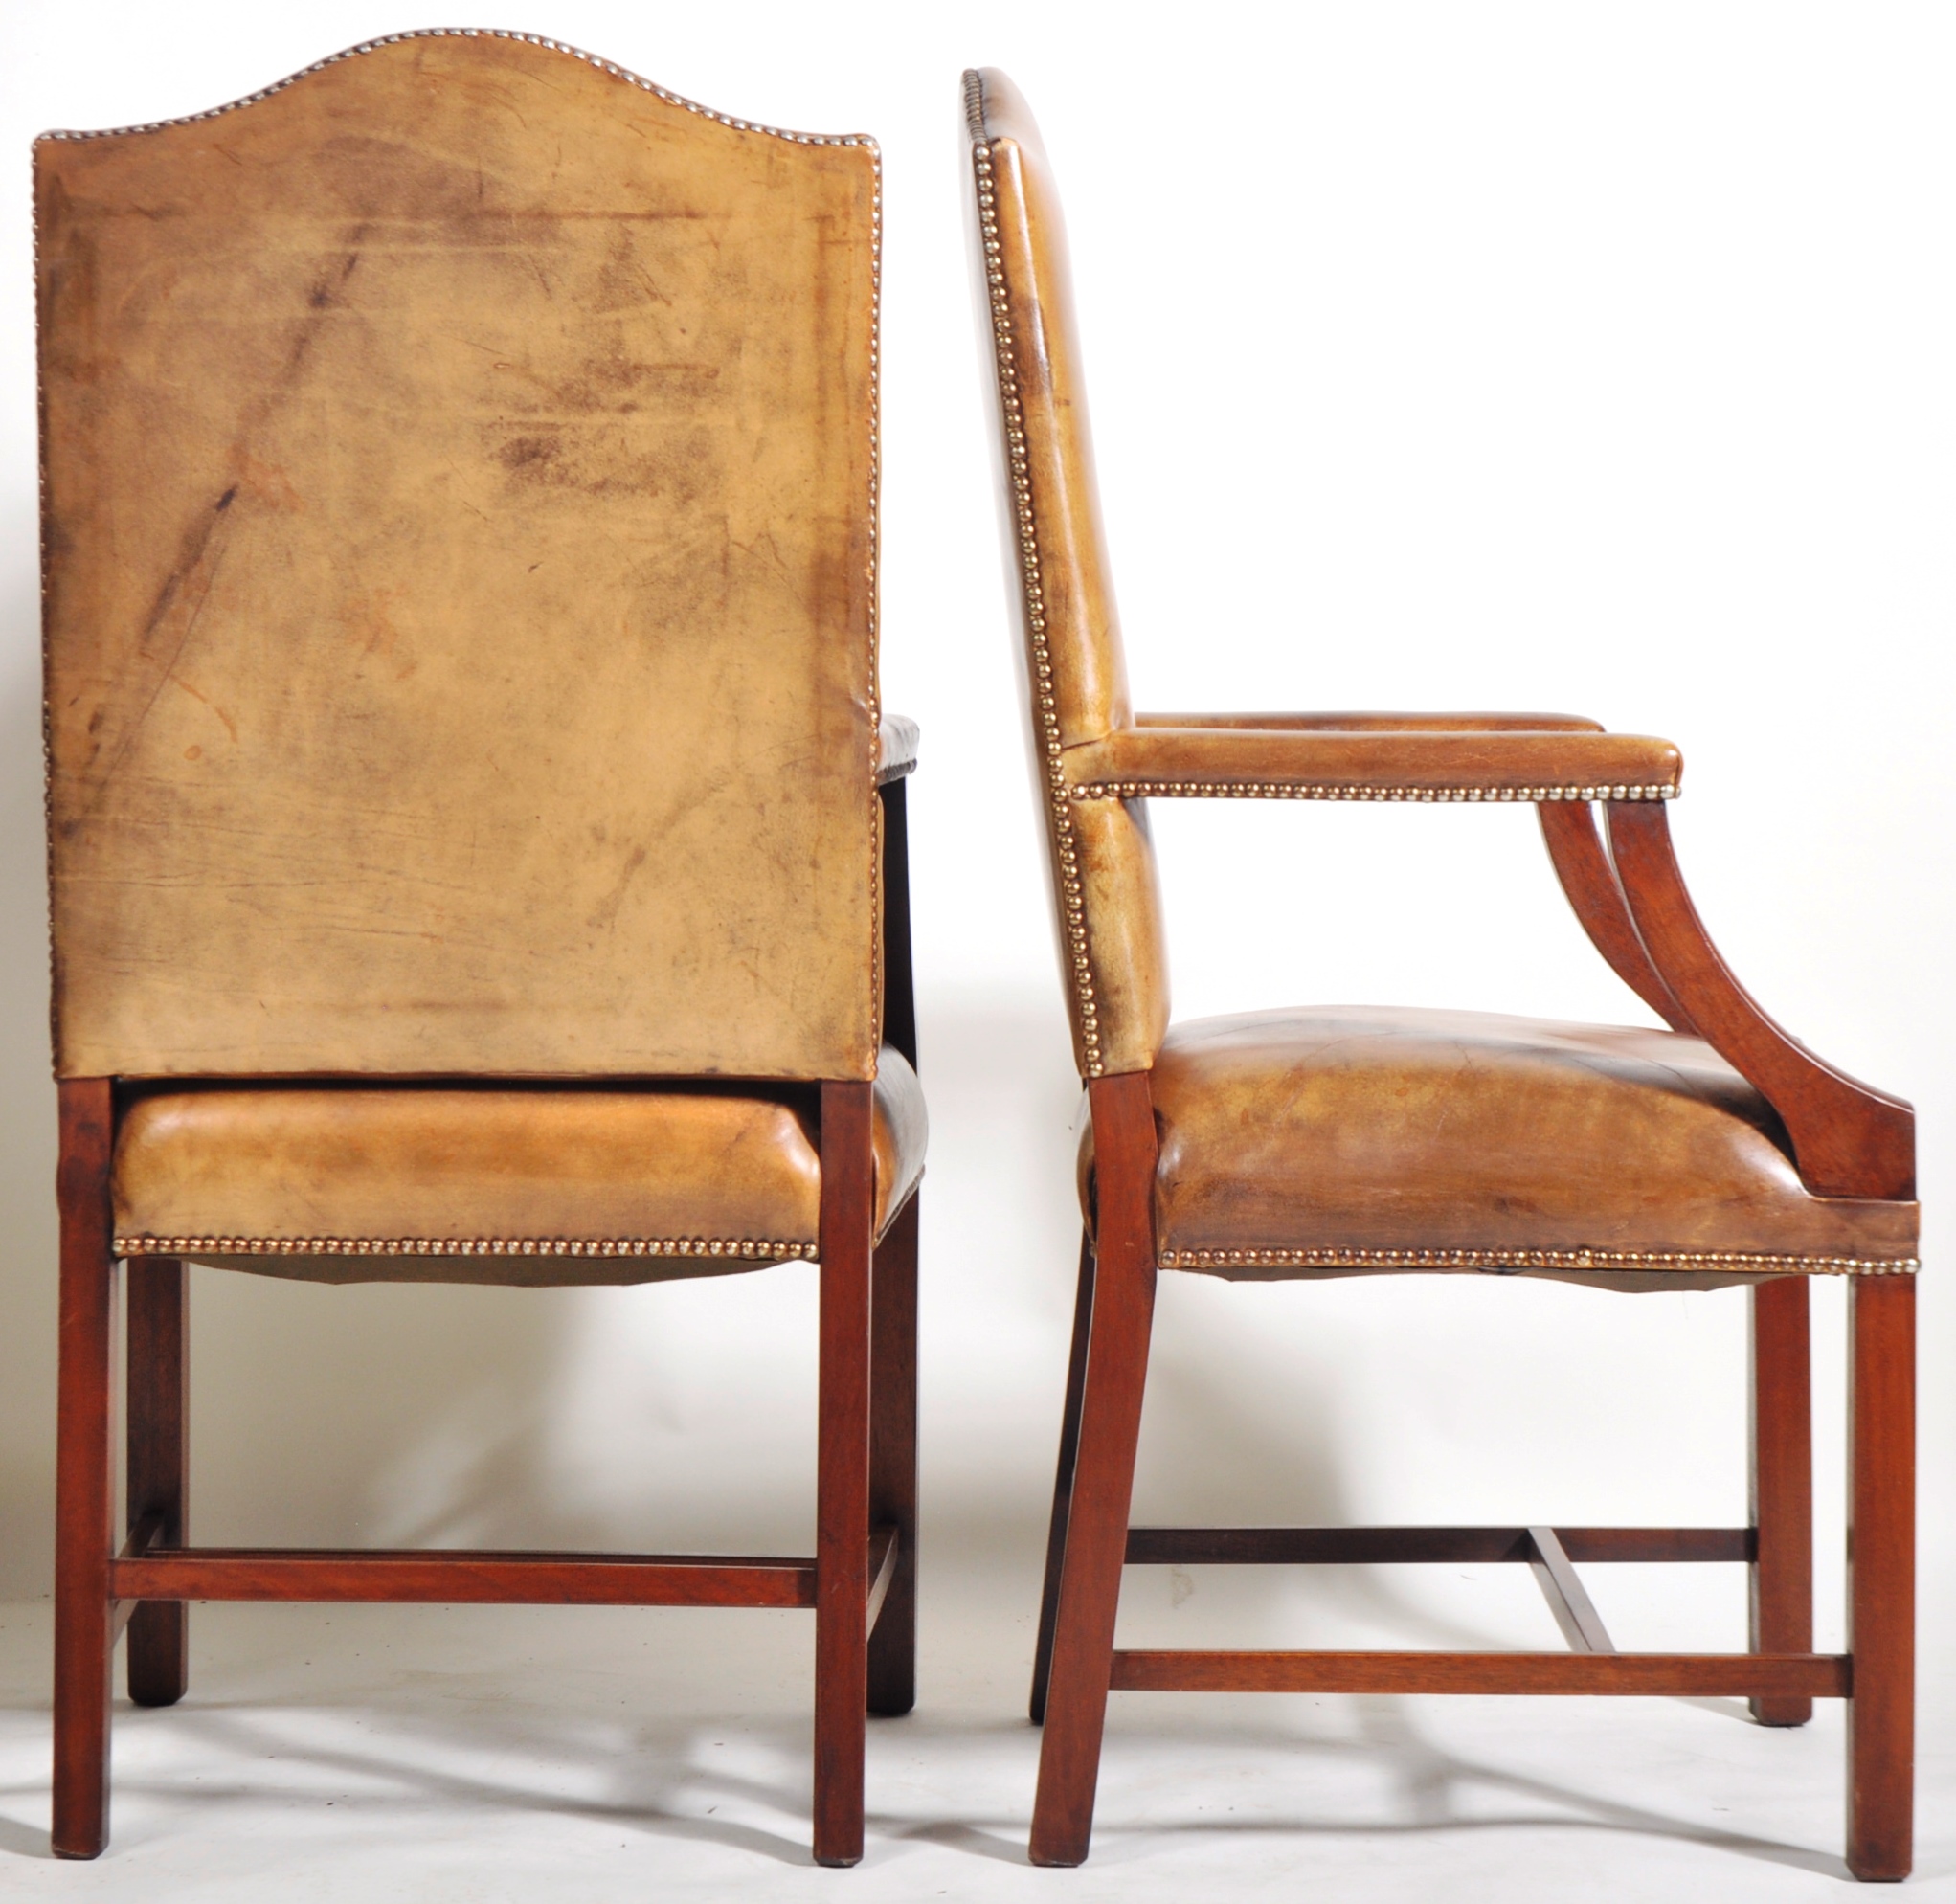 PAIR OF GEORGE II MANNER FAUX LEATHER GAINSBOROUGH ARMCHAIRS - Image 6 of 7